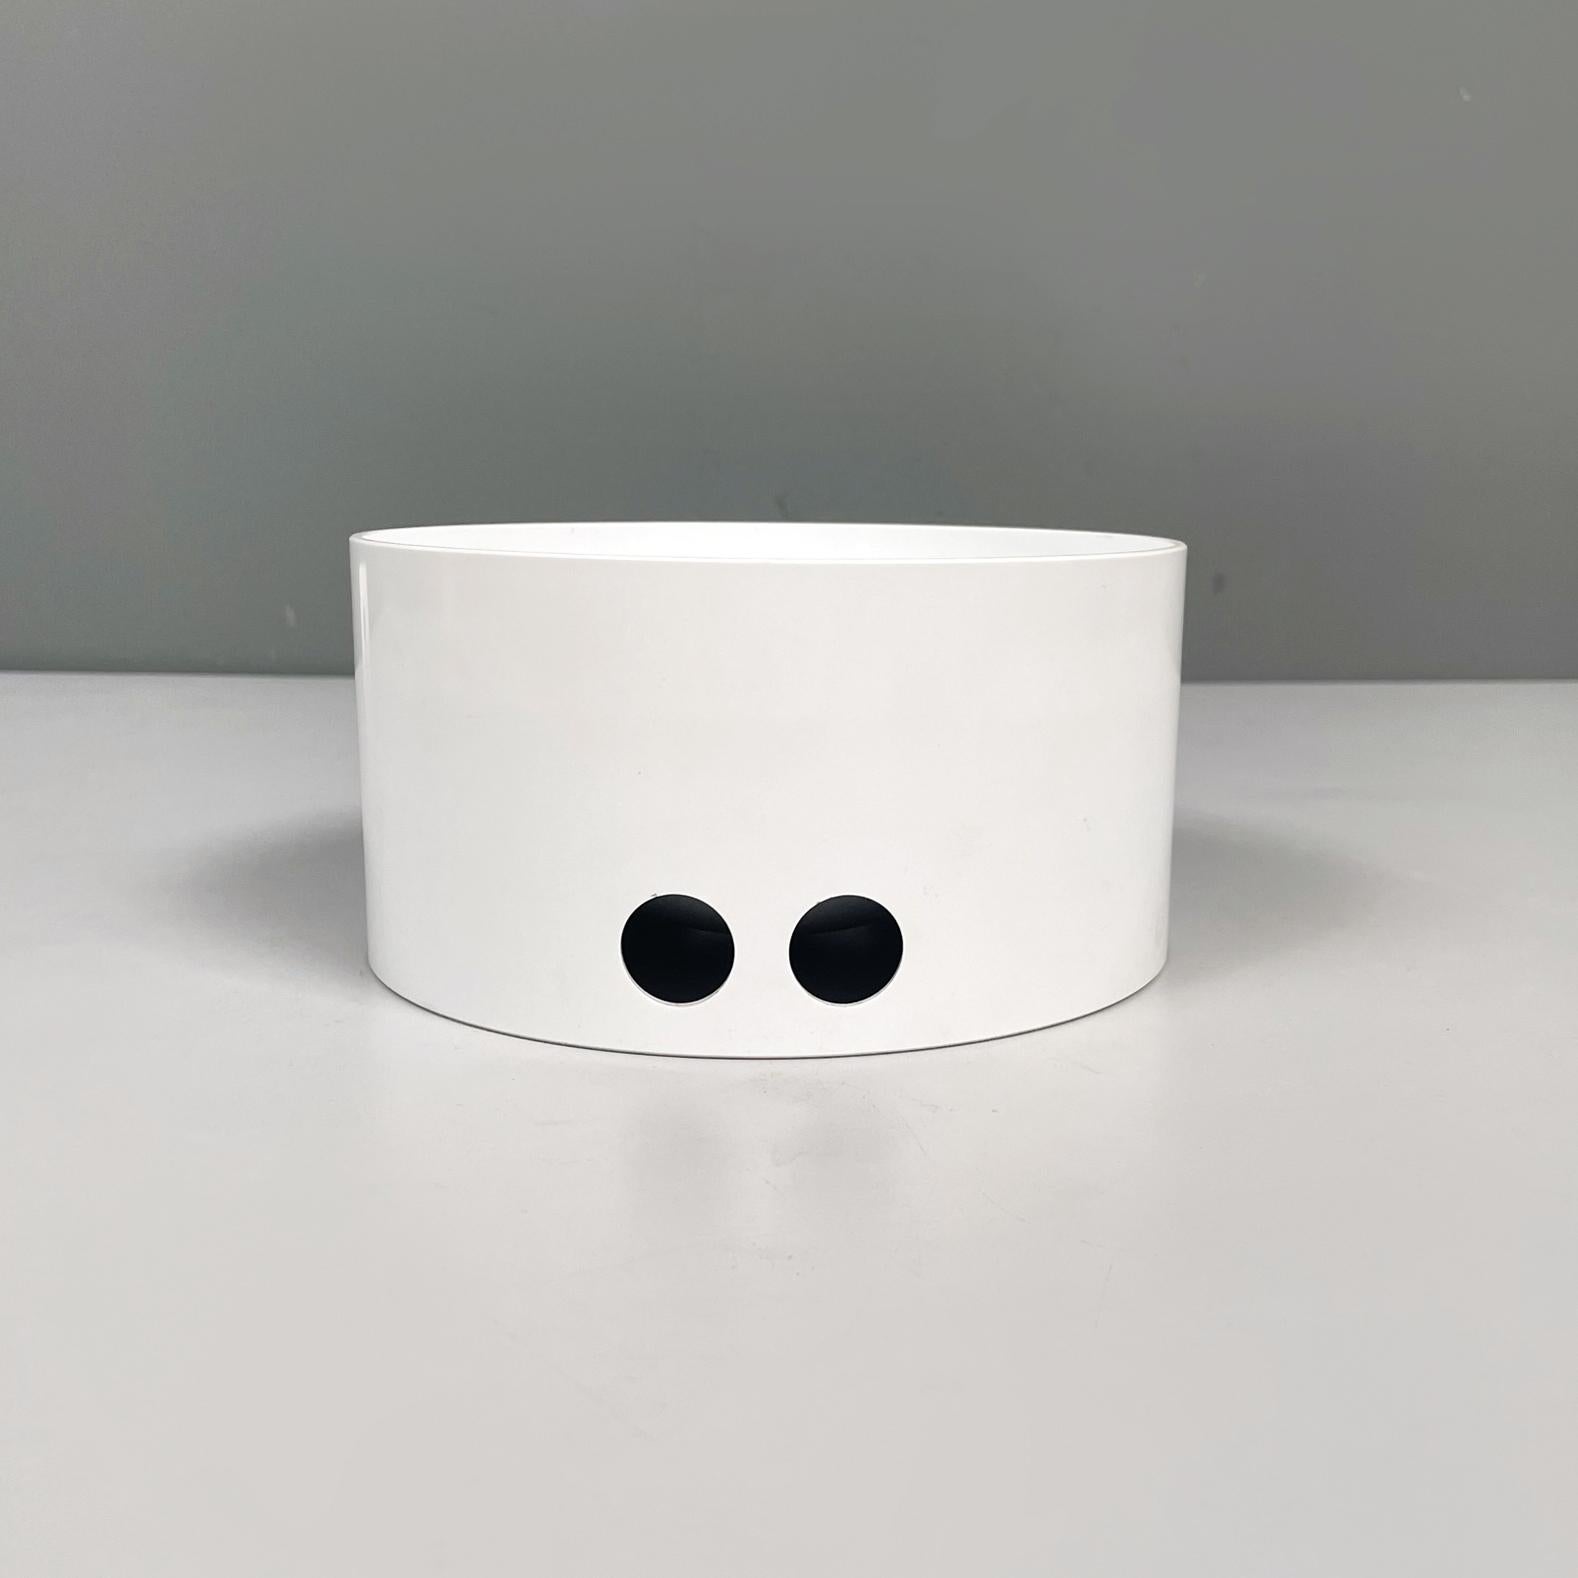 Space Age Italian Modern White plastic cylindrical bowl by Enzo Mari for Danese, 1970s For Sale